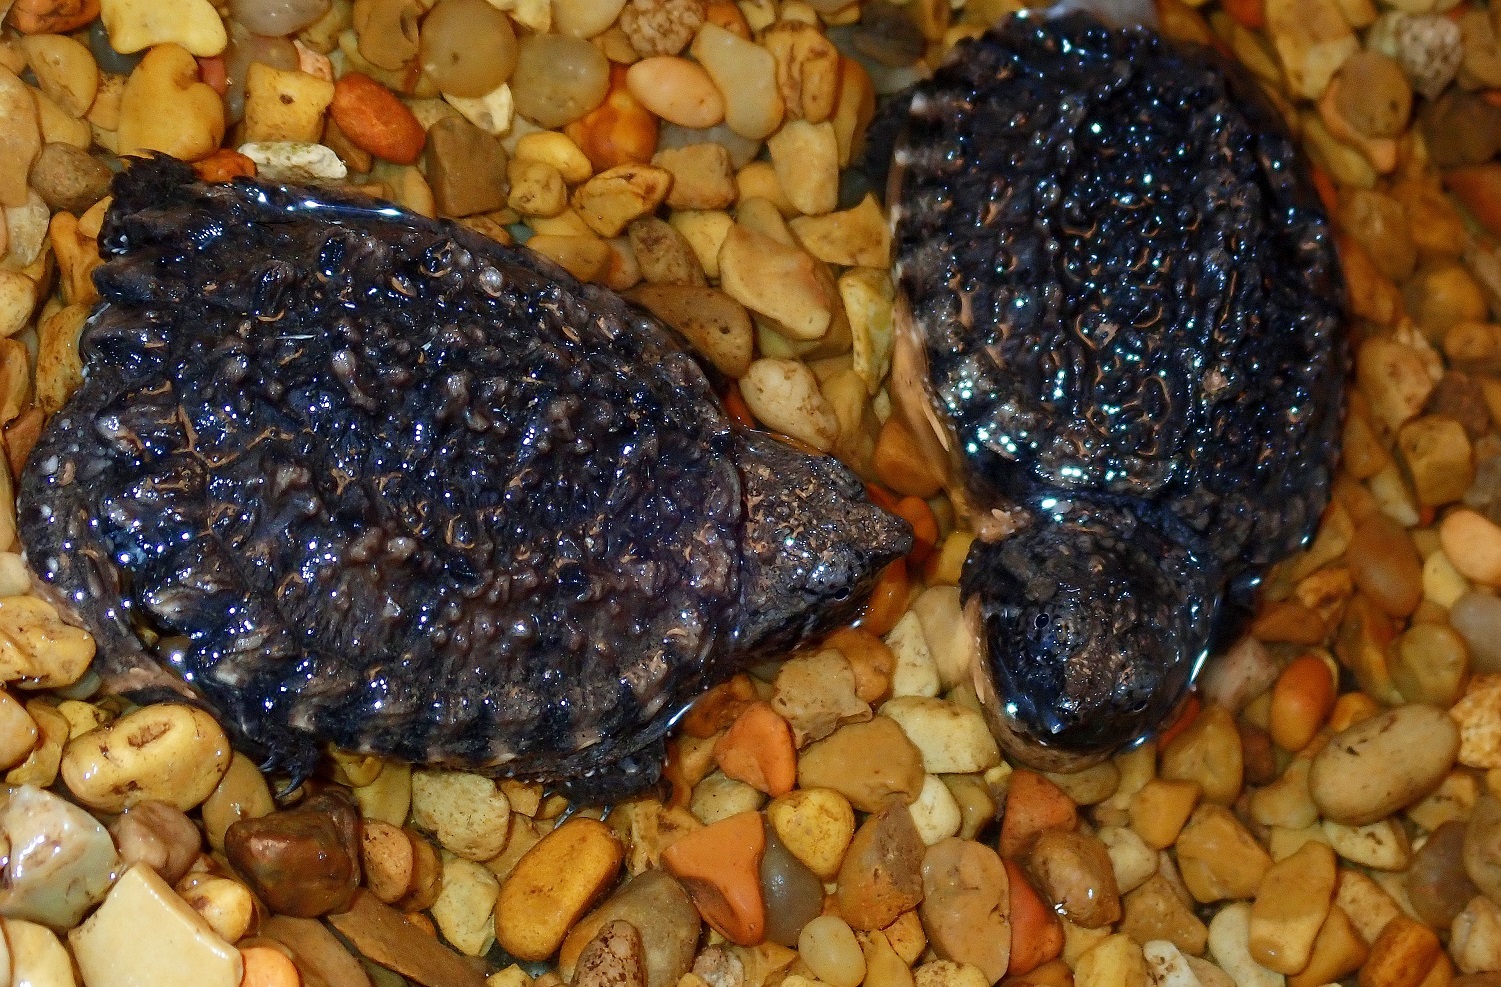 Two baby snapping turtles